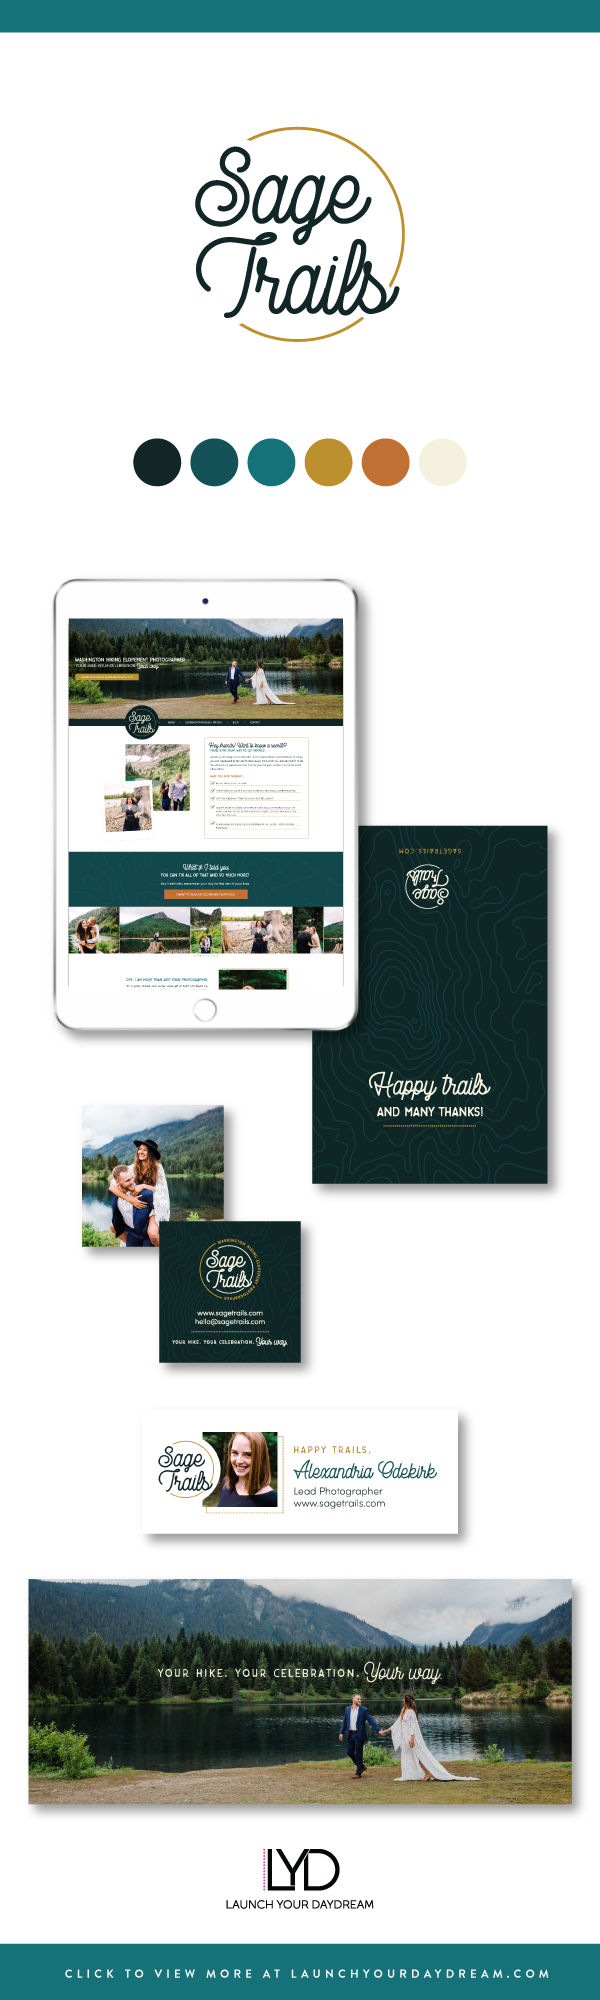 This is an adventurous, bold brand and website design for Sage Trails in Seatlle Washington